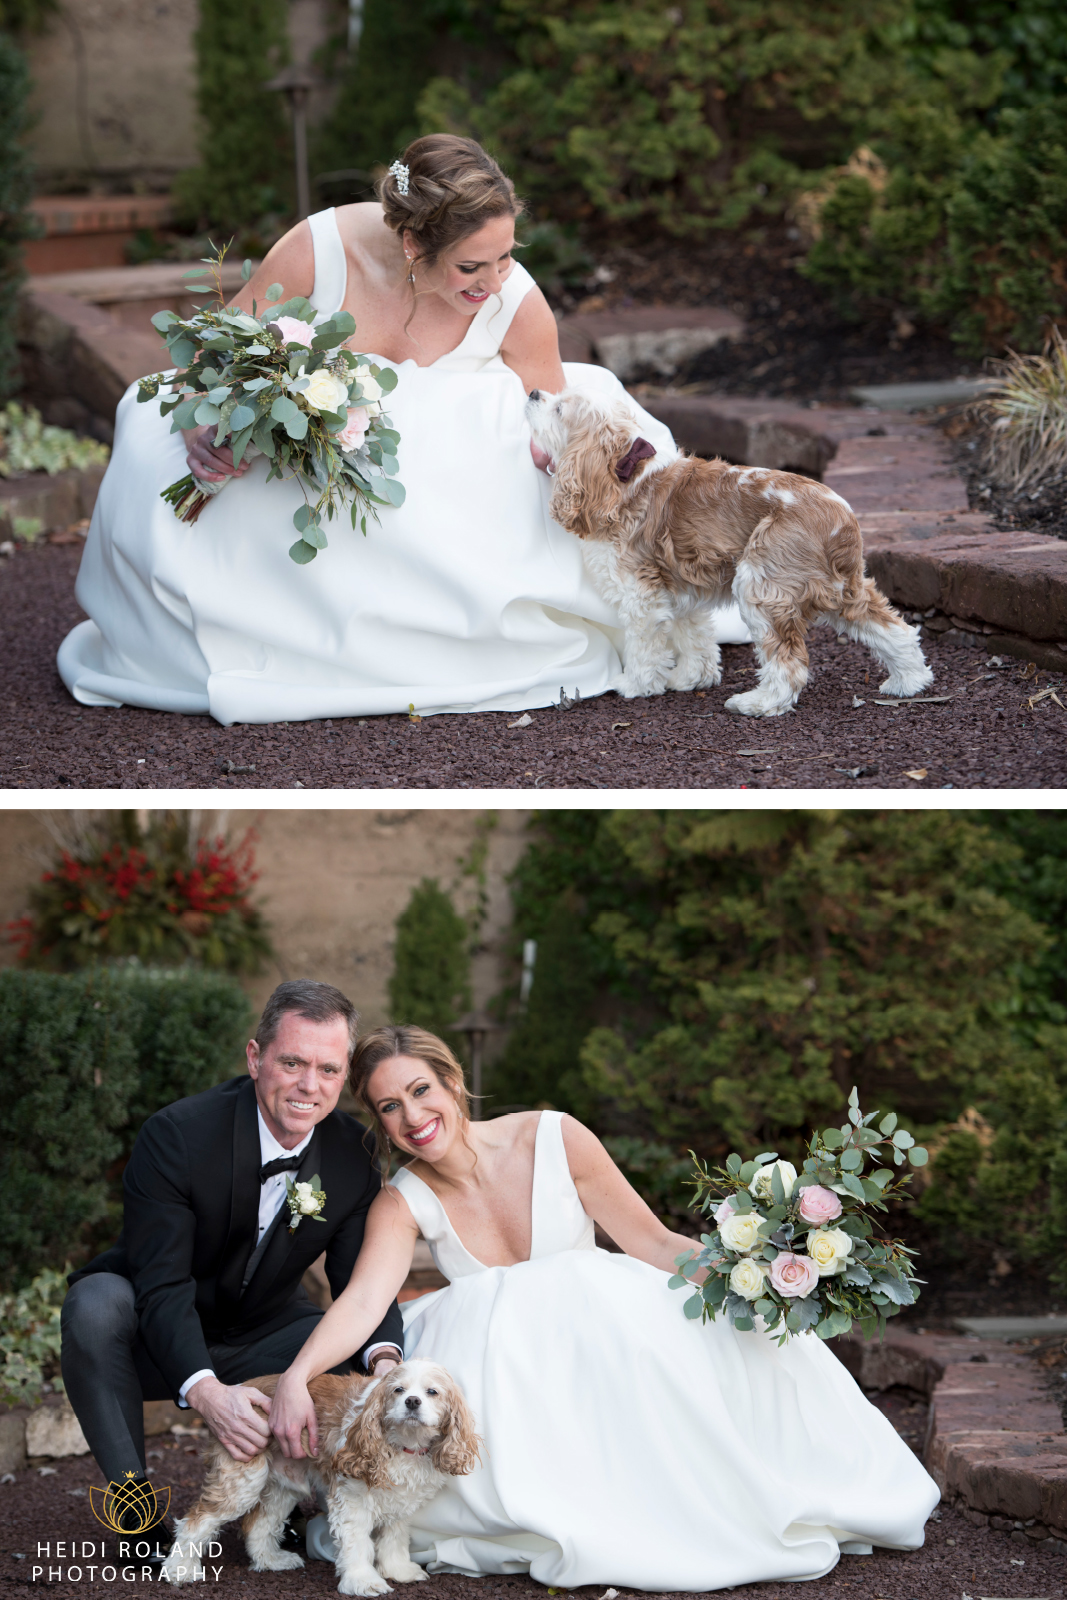 Bride and Groom and their dog on wedding day